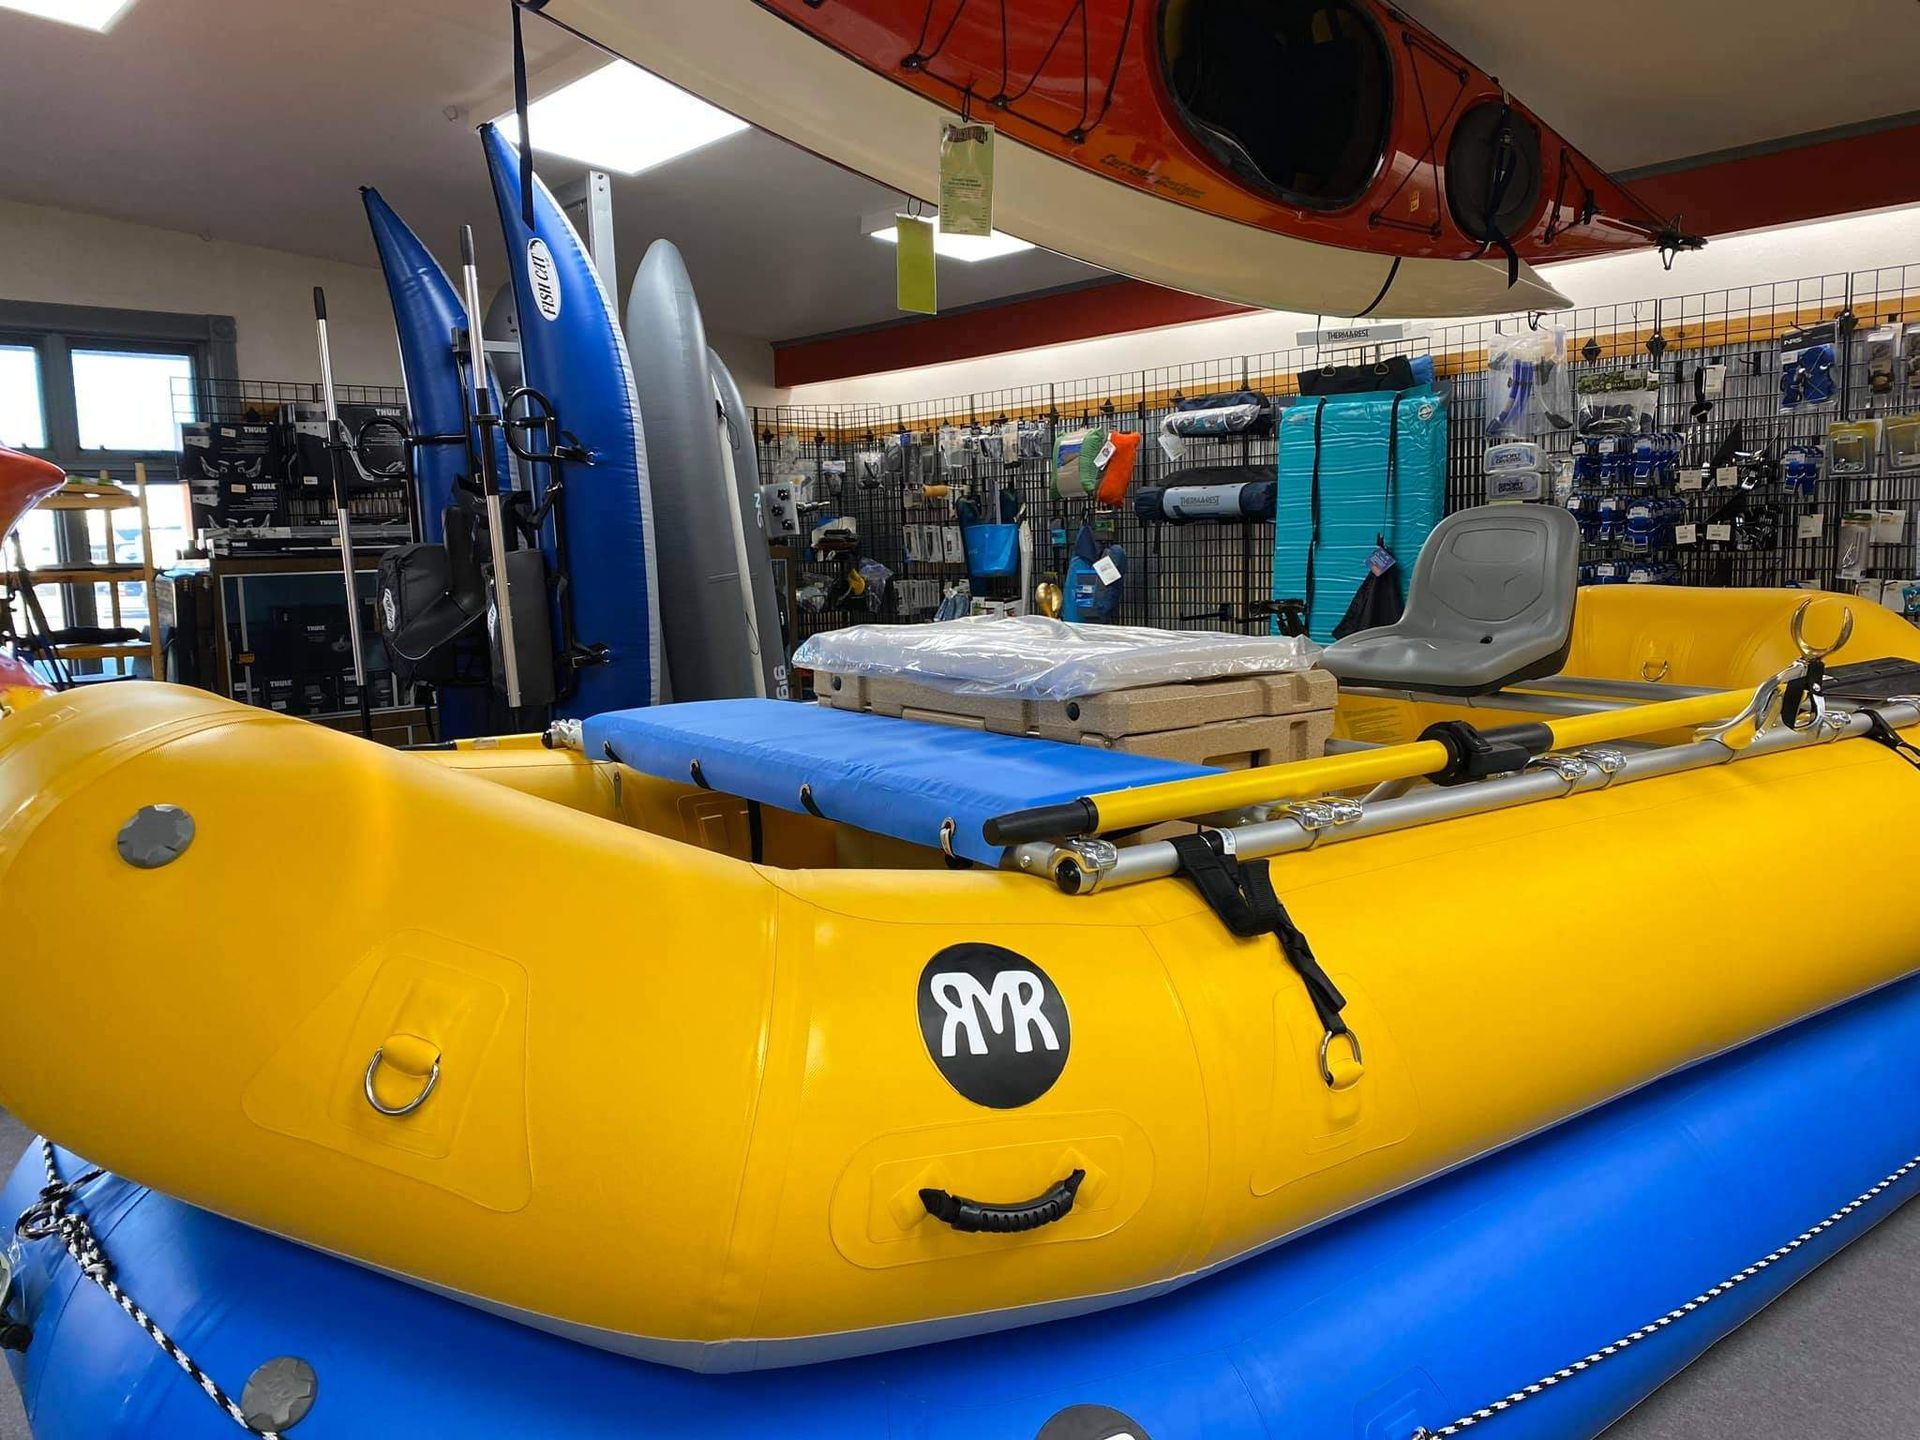 Rental Boats and Equipment in Billings, MT